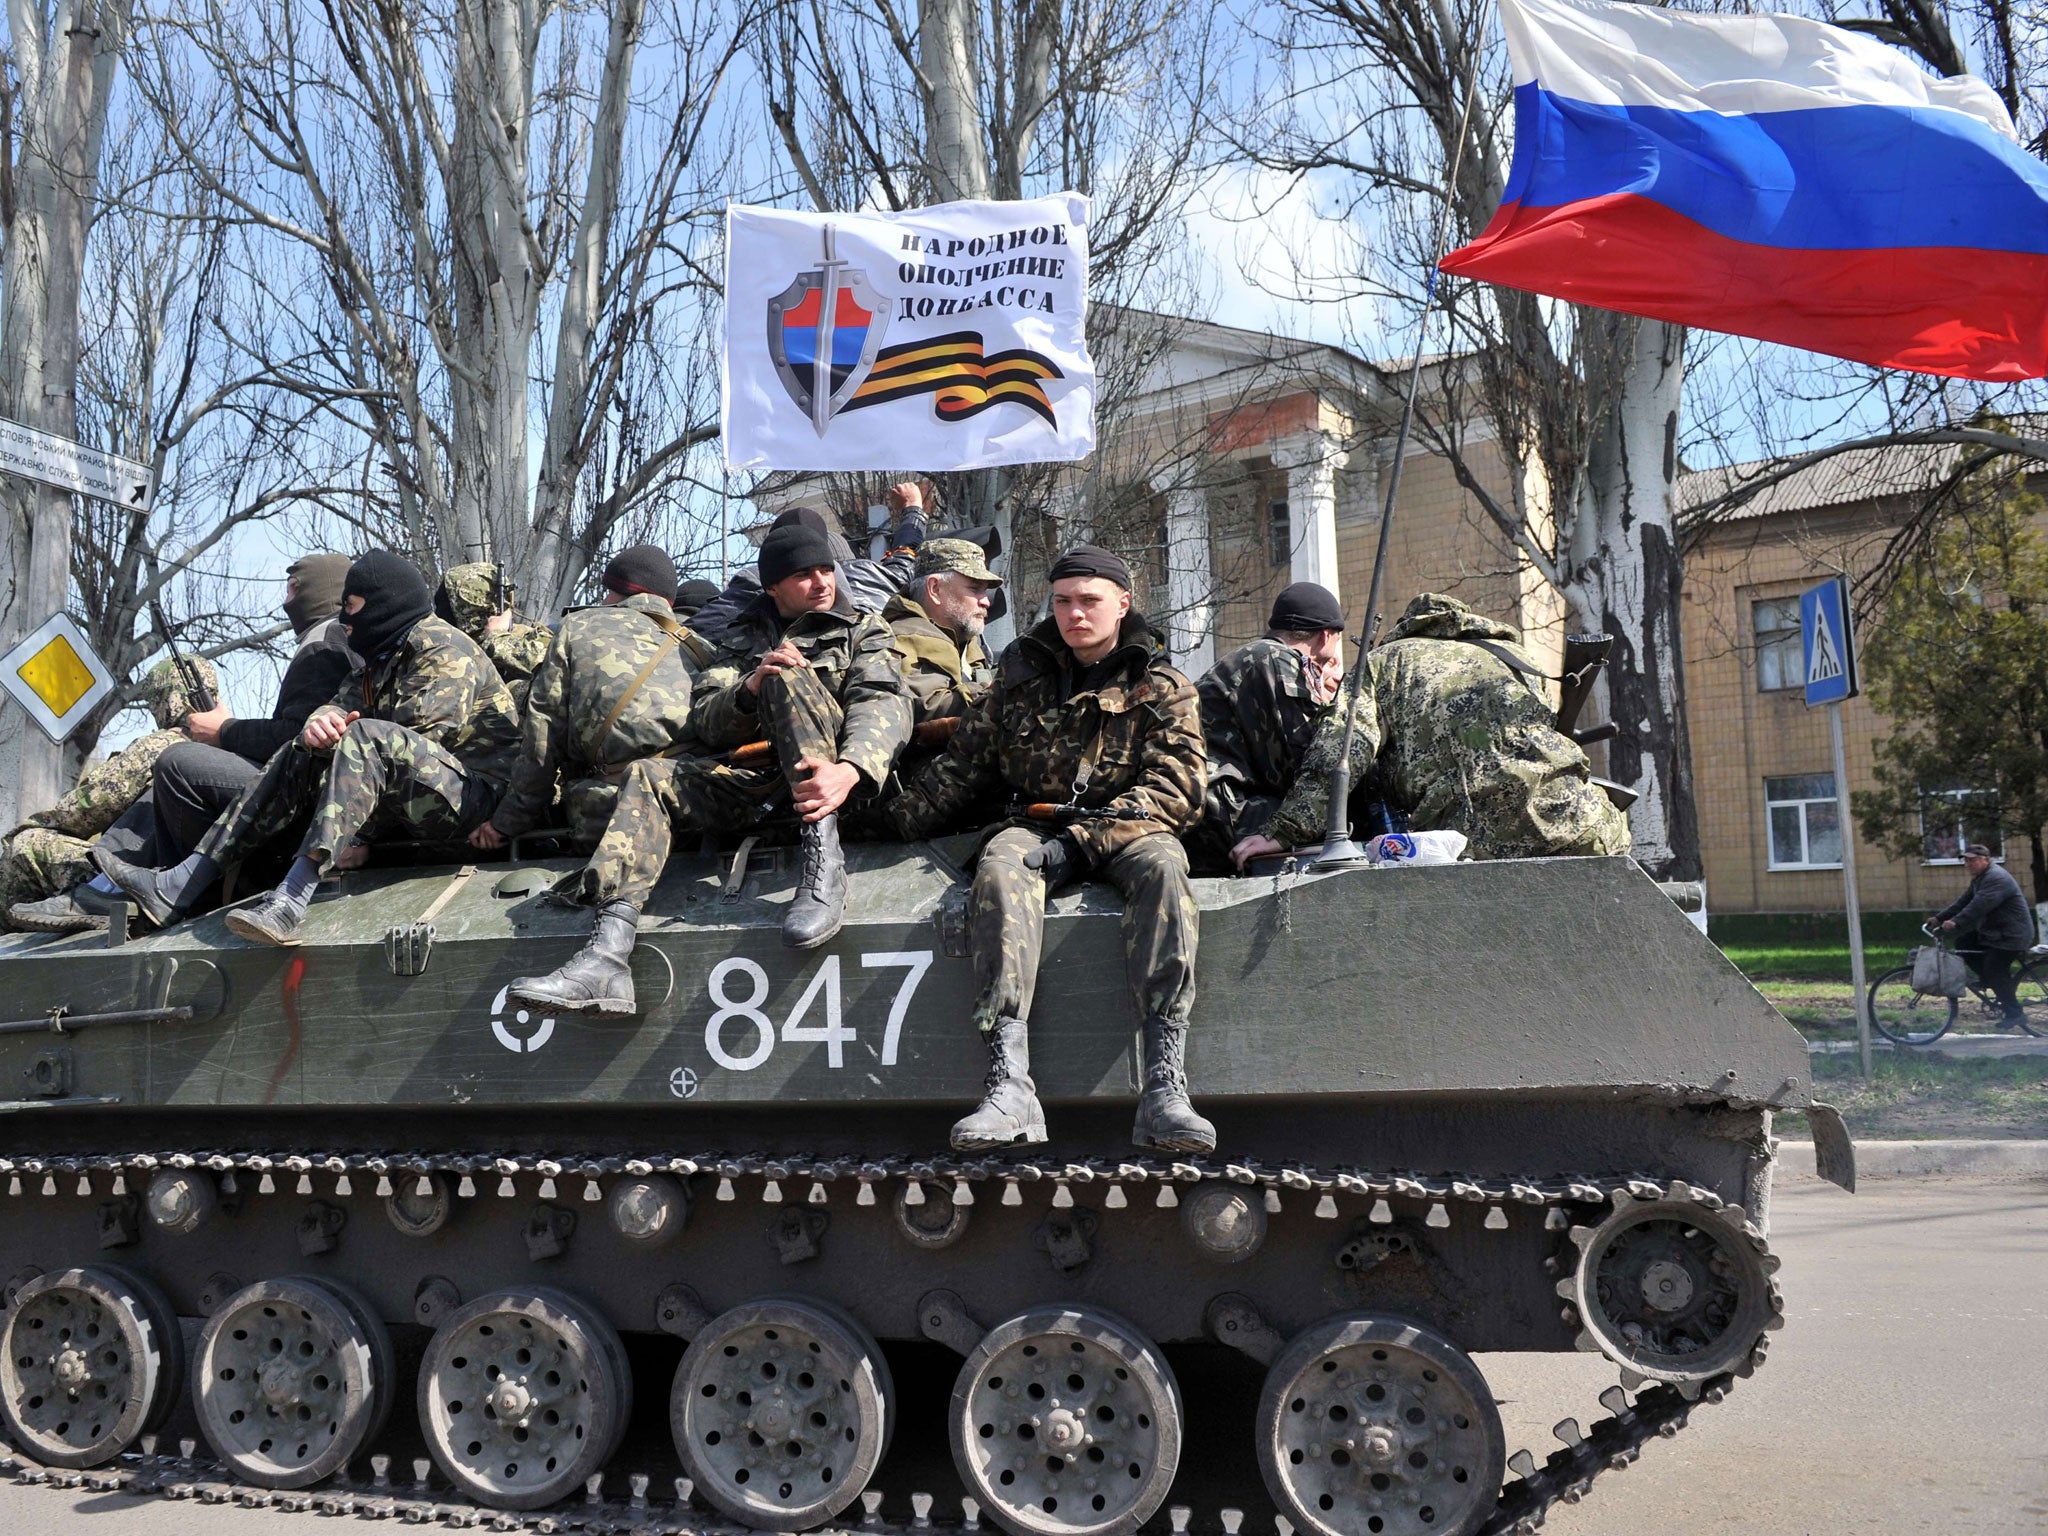 Men wearing military fatigues sit by a Russian flag and a white flag reading "People's volunteer corps of Donetsk" as they ride on an armoured personnel carrier (APC) in the eastern Ukrainian city of Slavyansk